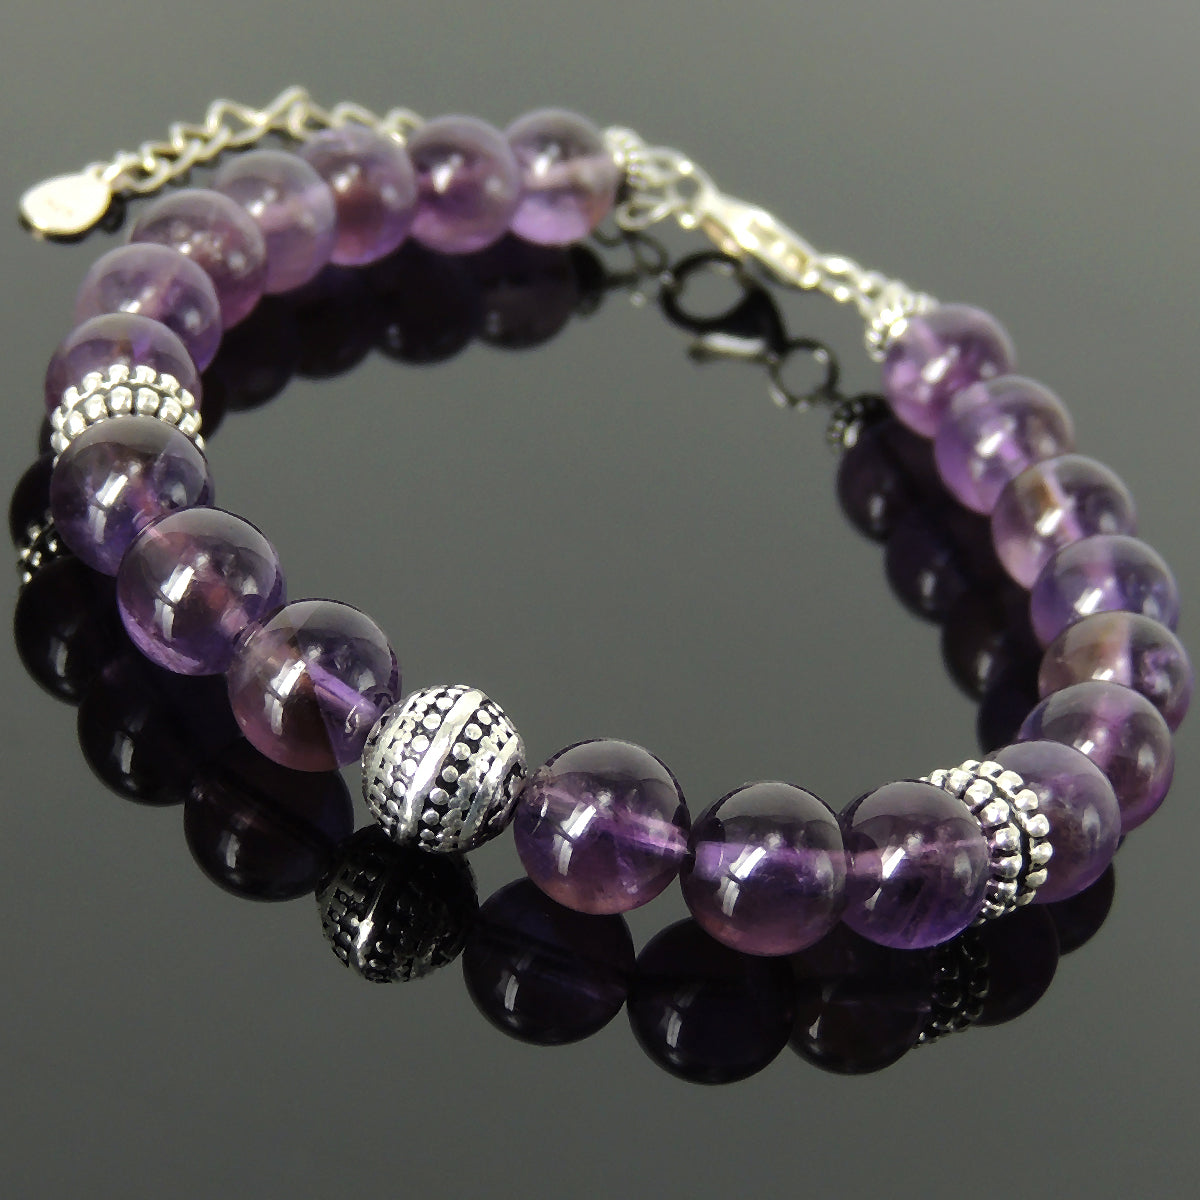 Yoga Pilates Energy Stamina Bracelet with Healing 8mm Amethyst Crystals Conscious Meditation Gemstones & Genuine S925 Sterling Silver Energy Beads, Clasp, Chain - BR1506